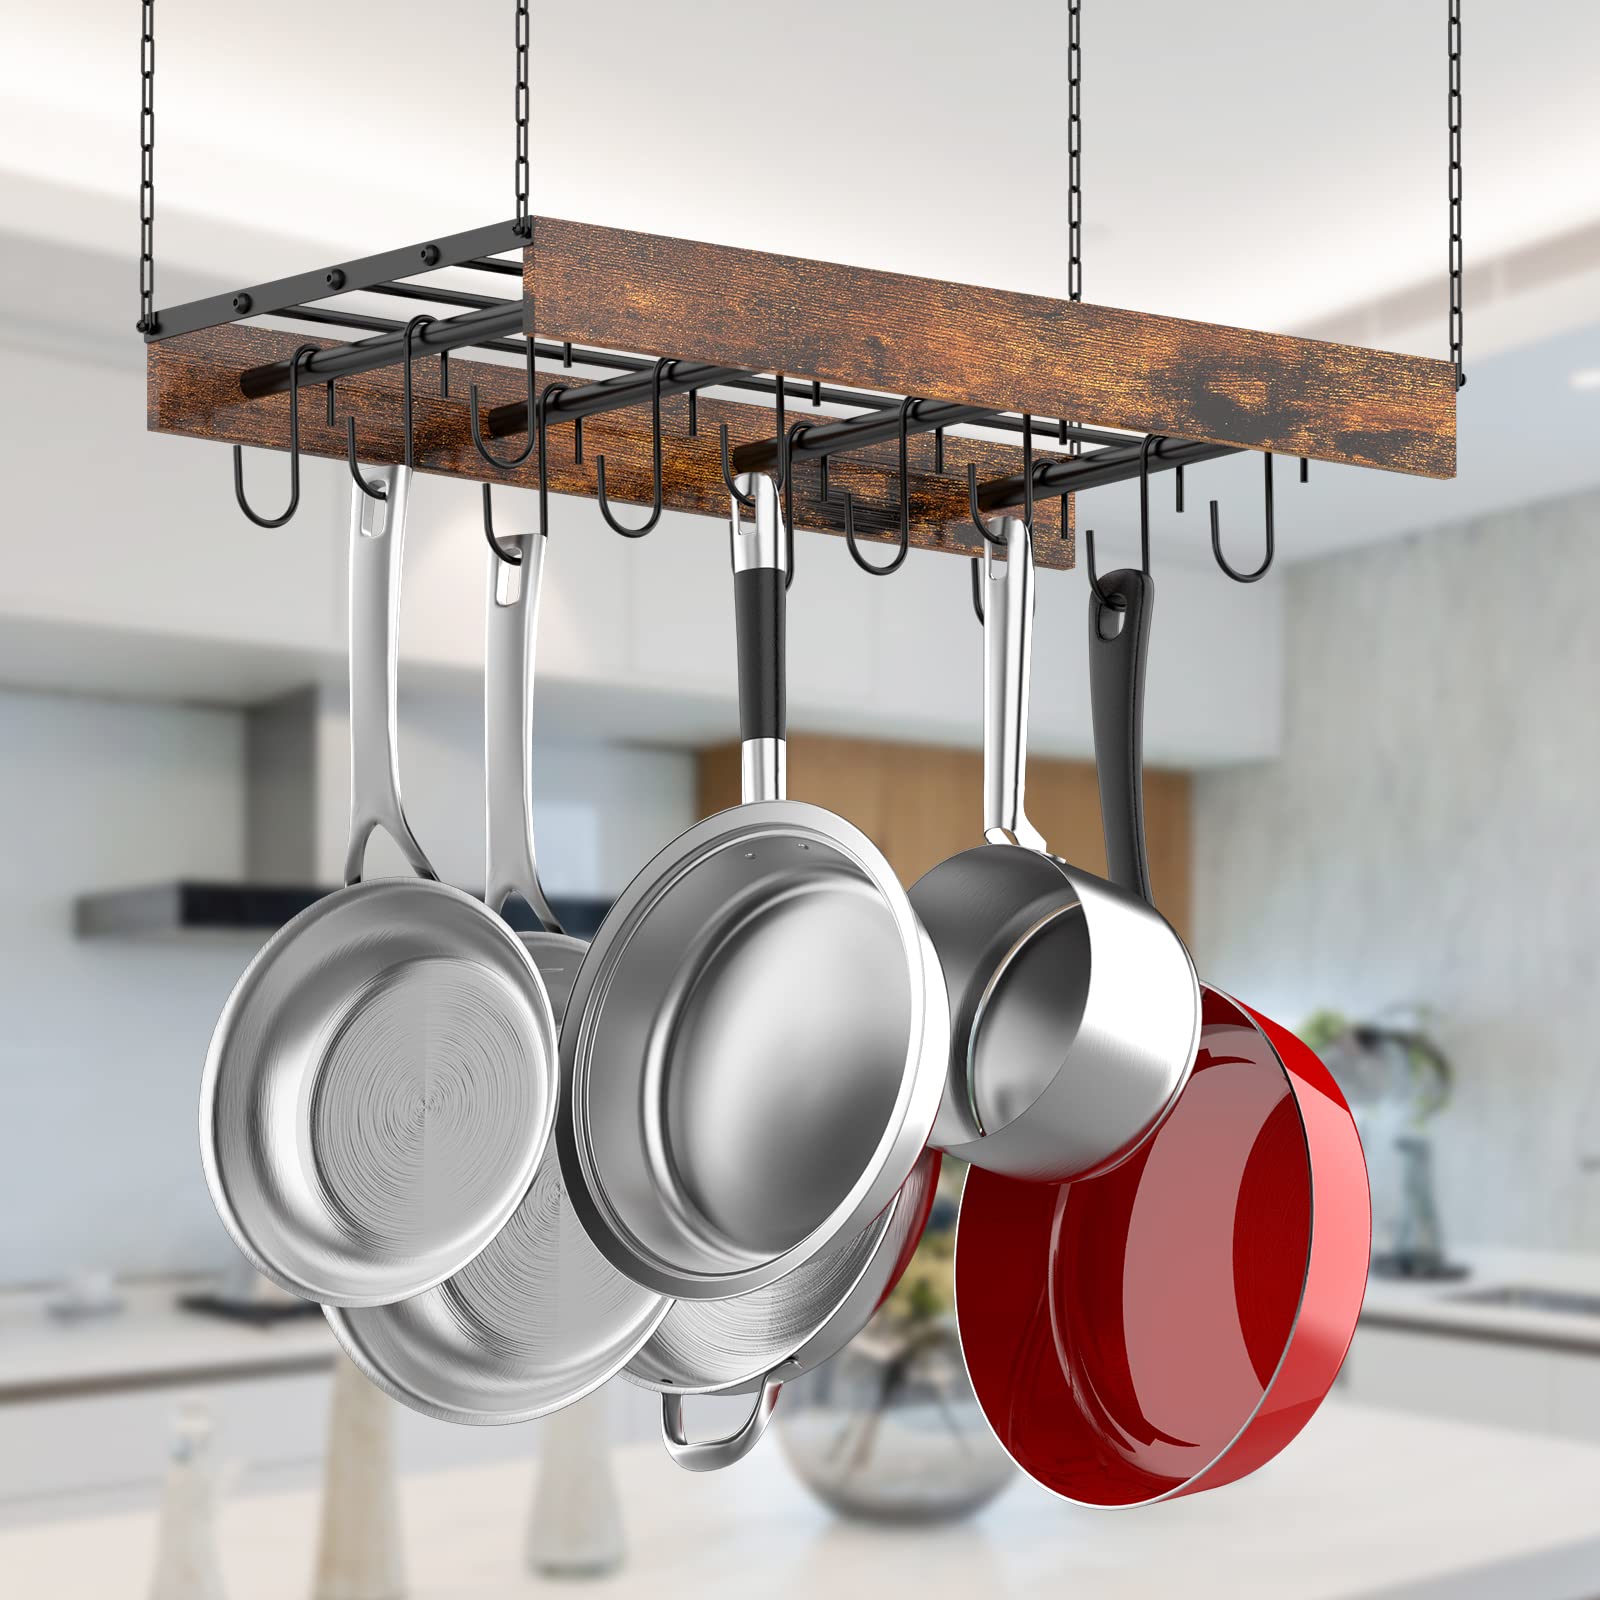 MAWEW Pot Rack Hanging,pot hanger,Hanging Pot Rack Ceiling Mount,Vintage Pot Hangers for Kitchen Ceiling,The Terfect Combination of Iron and Wood Pot Hanger,Measures 24 x 13 x 2.4 Inches.（Black）